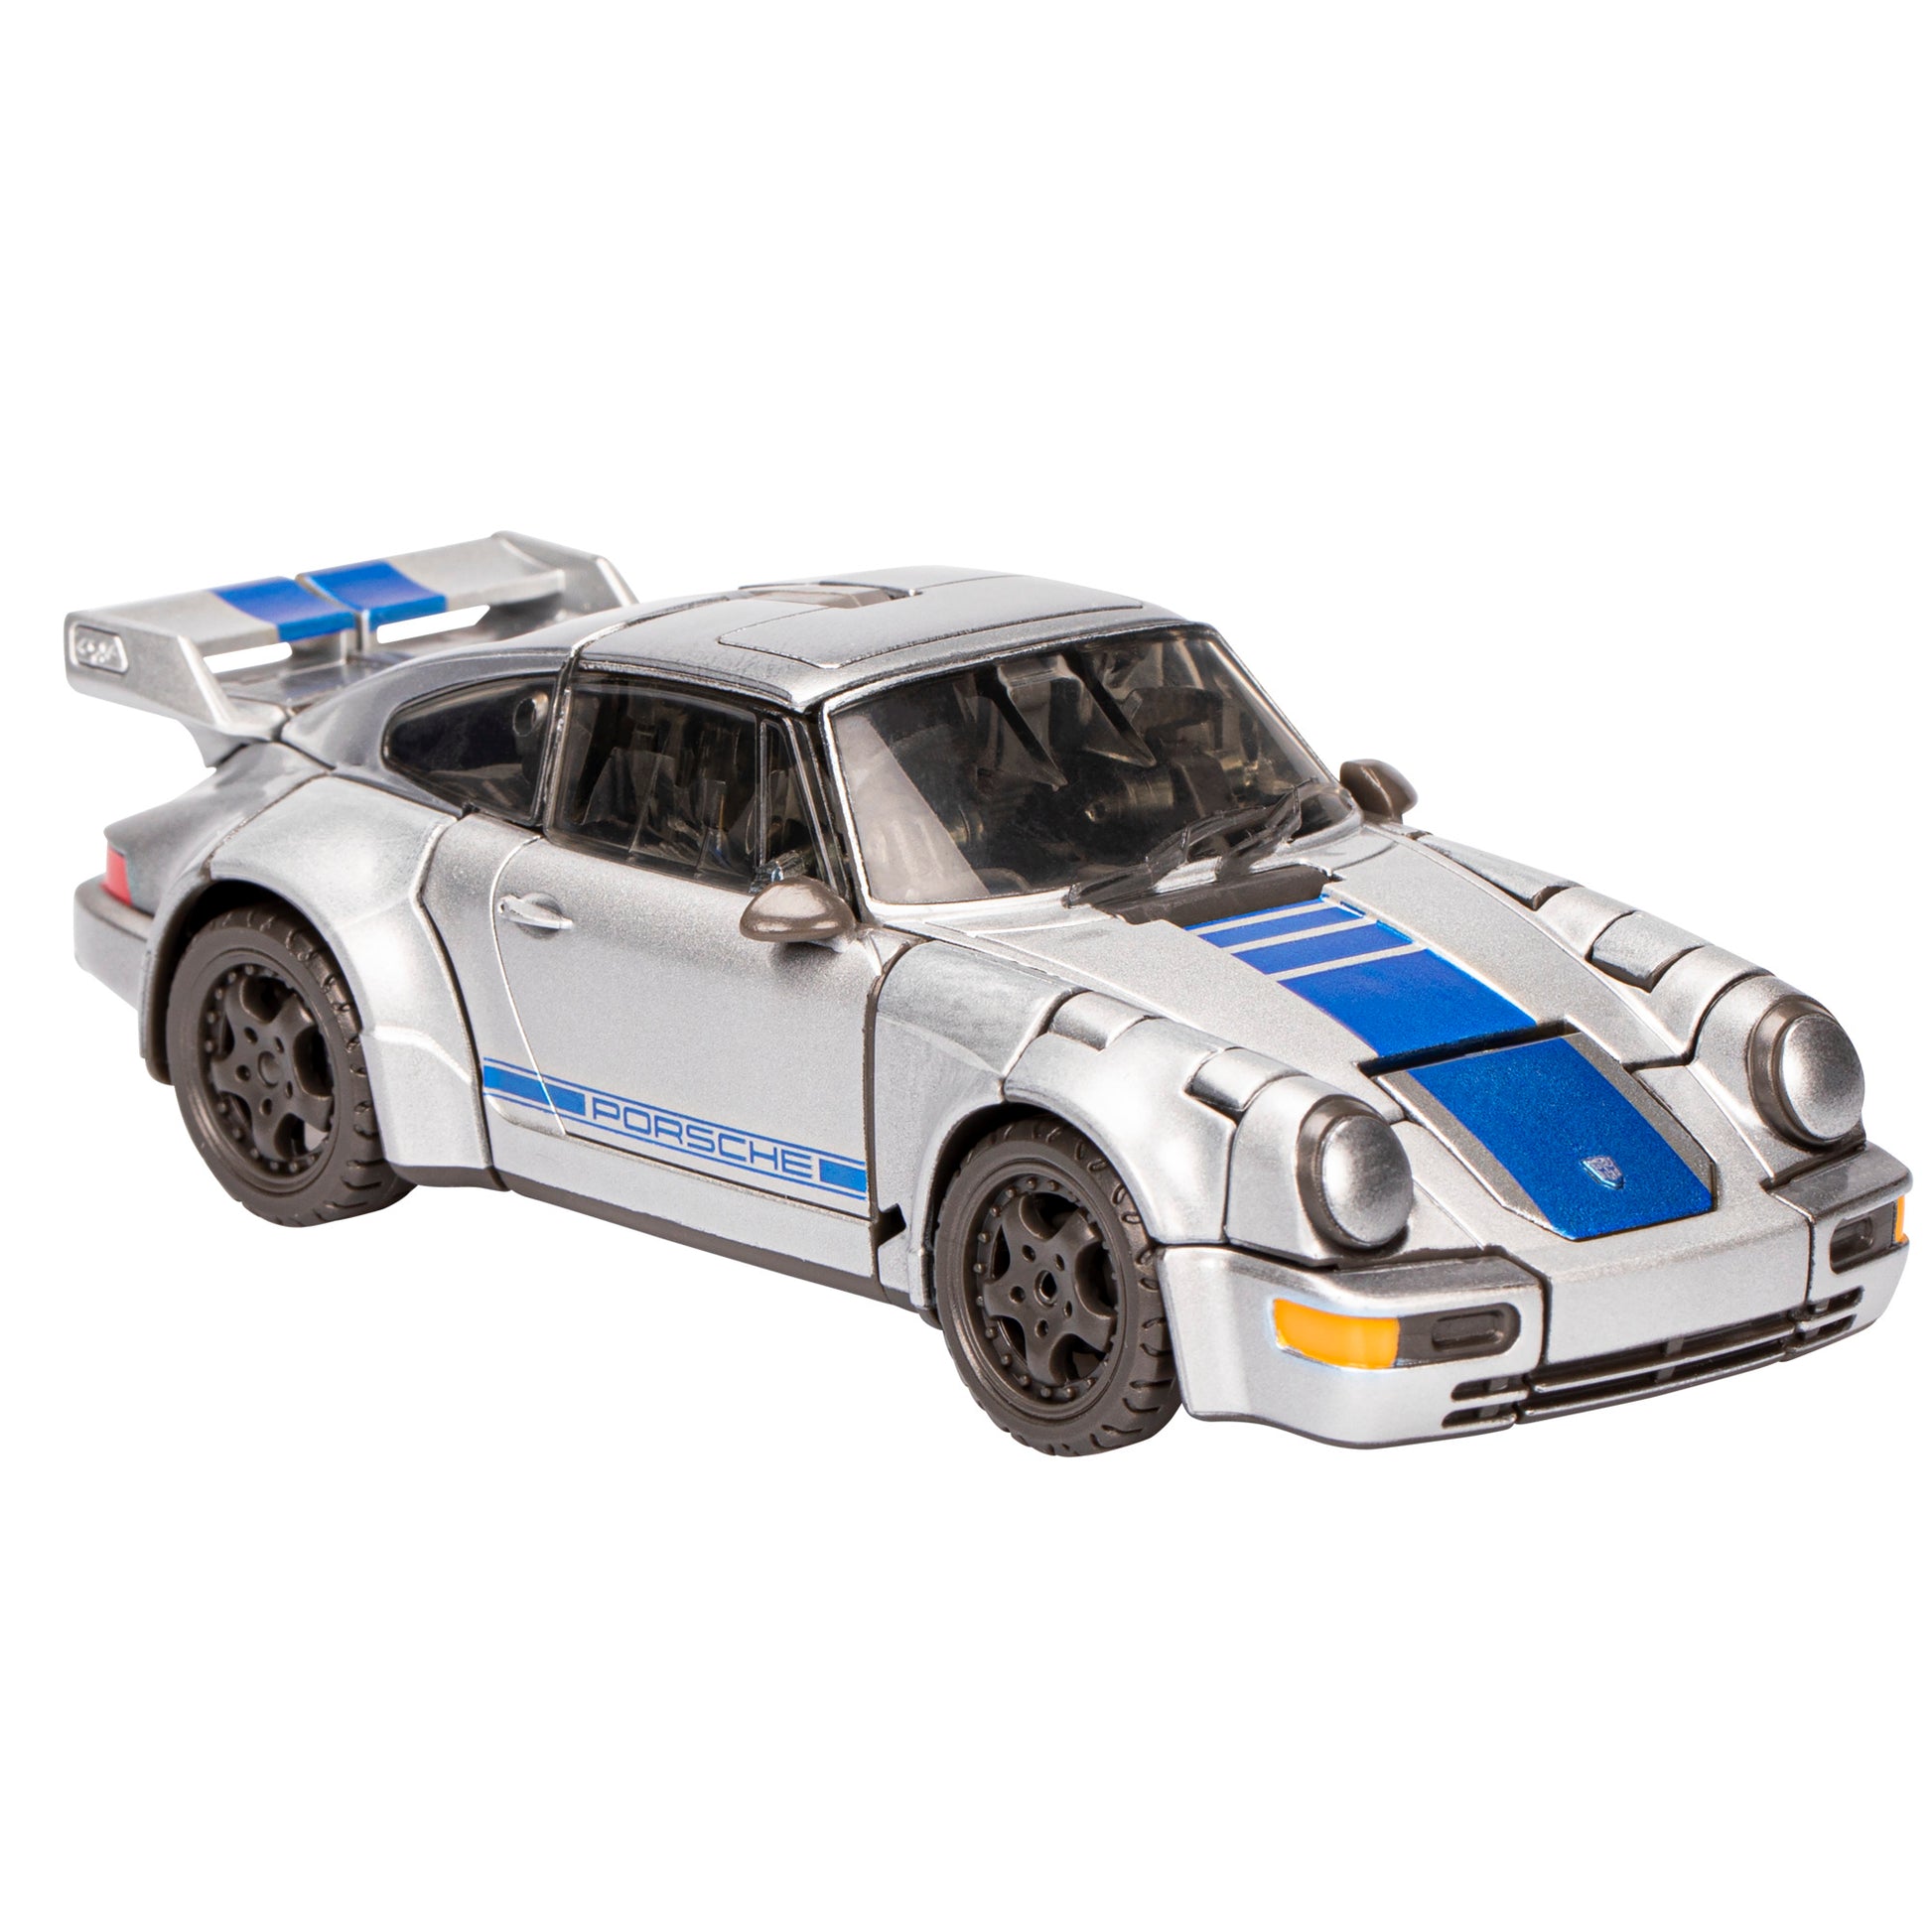 Transformed Autobot Mirage Action Figure Toy - Heretoserveyou